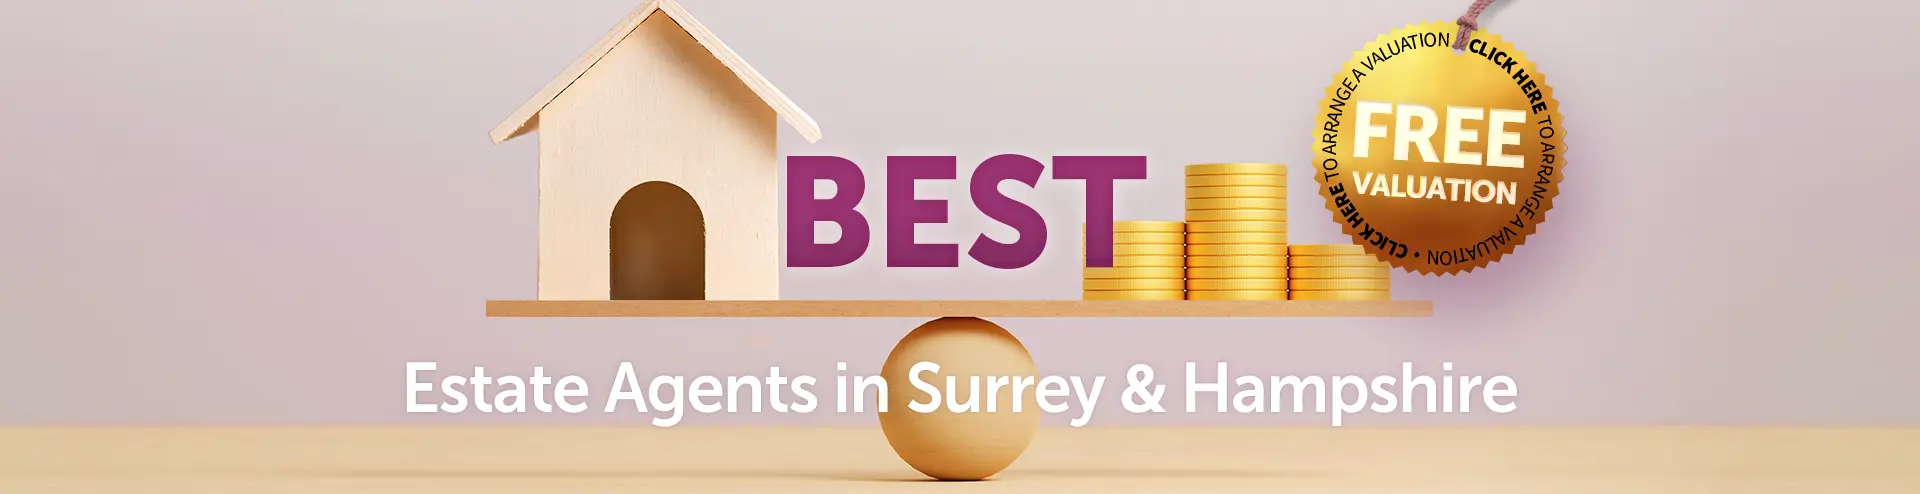 Estate Agents in Surrey and Hampshire